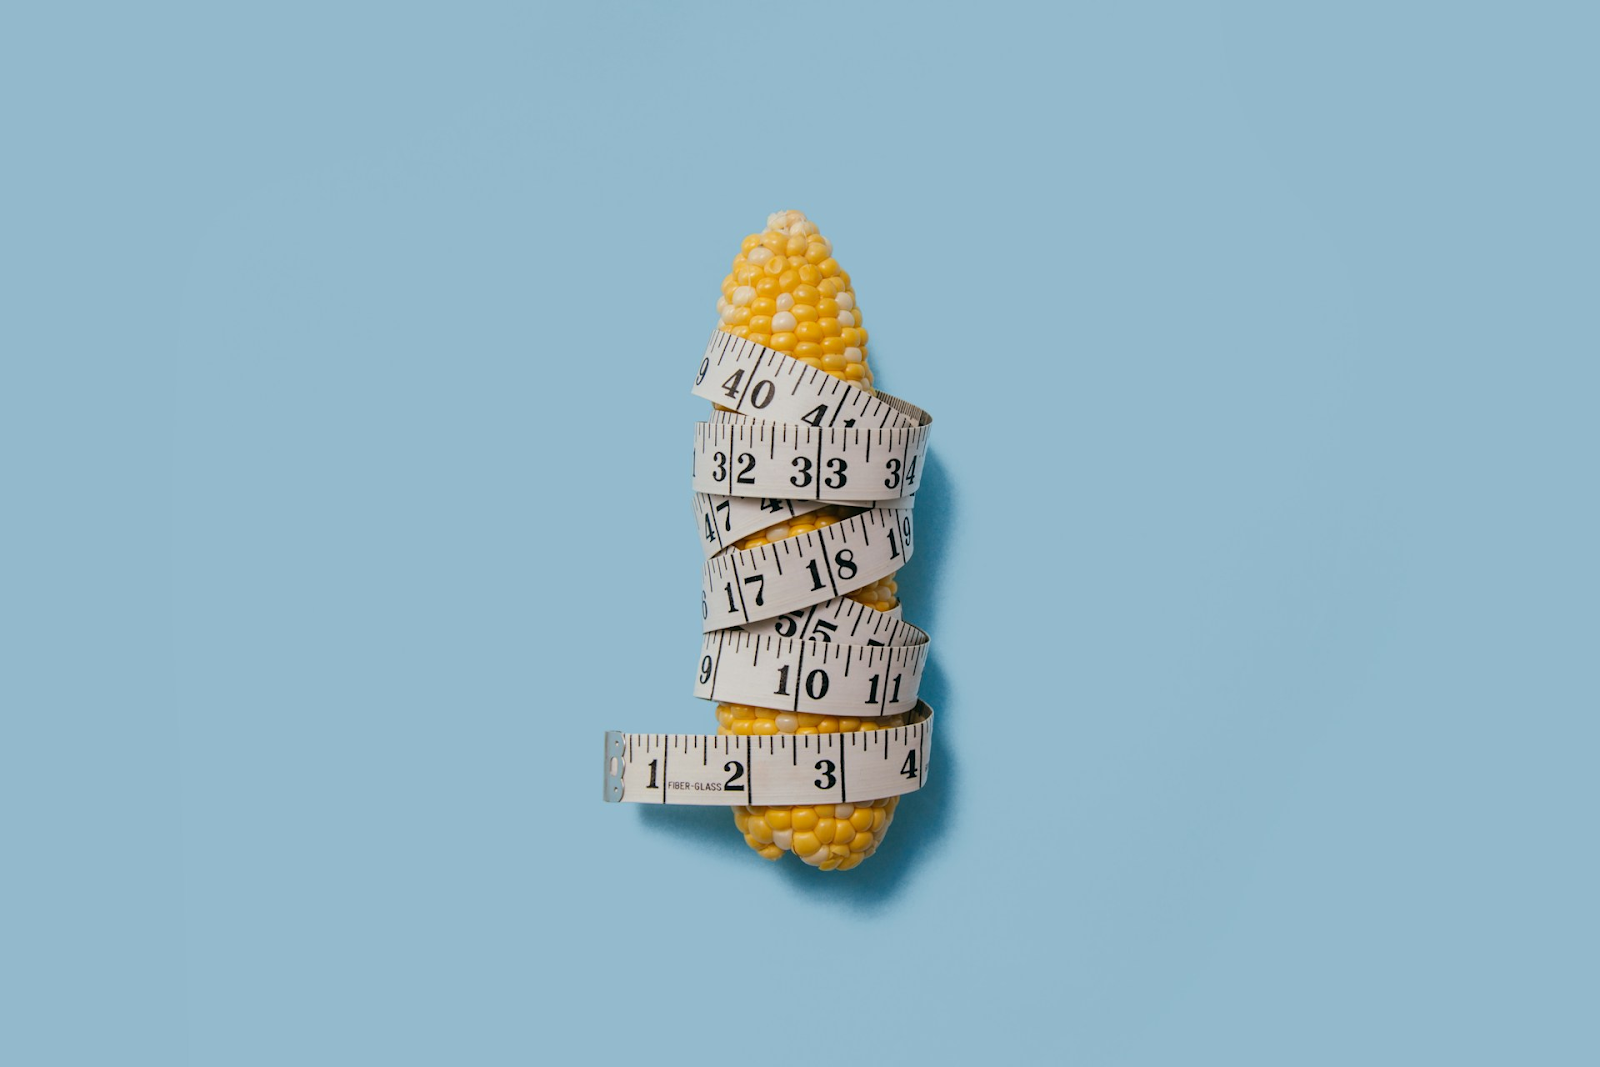 A piece of corn wrapped in a tape measure, using a penis pump makes it bigger by stimulating blood vessels - https://unsplash.com/photos/yellow-corn-iuAMkSsQsIY